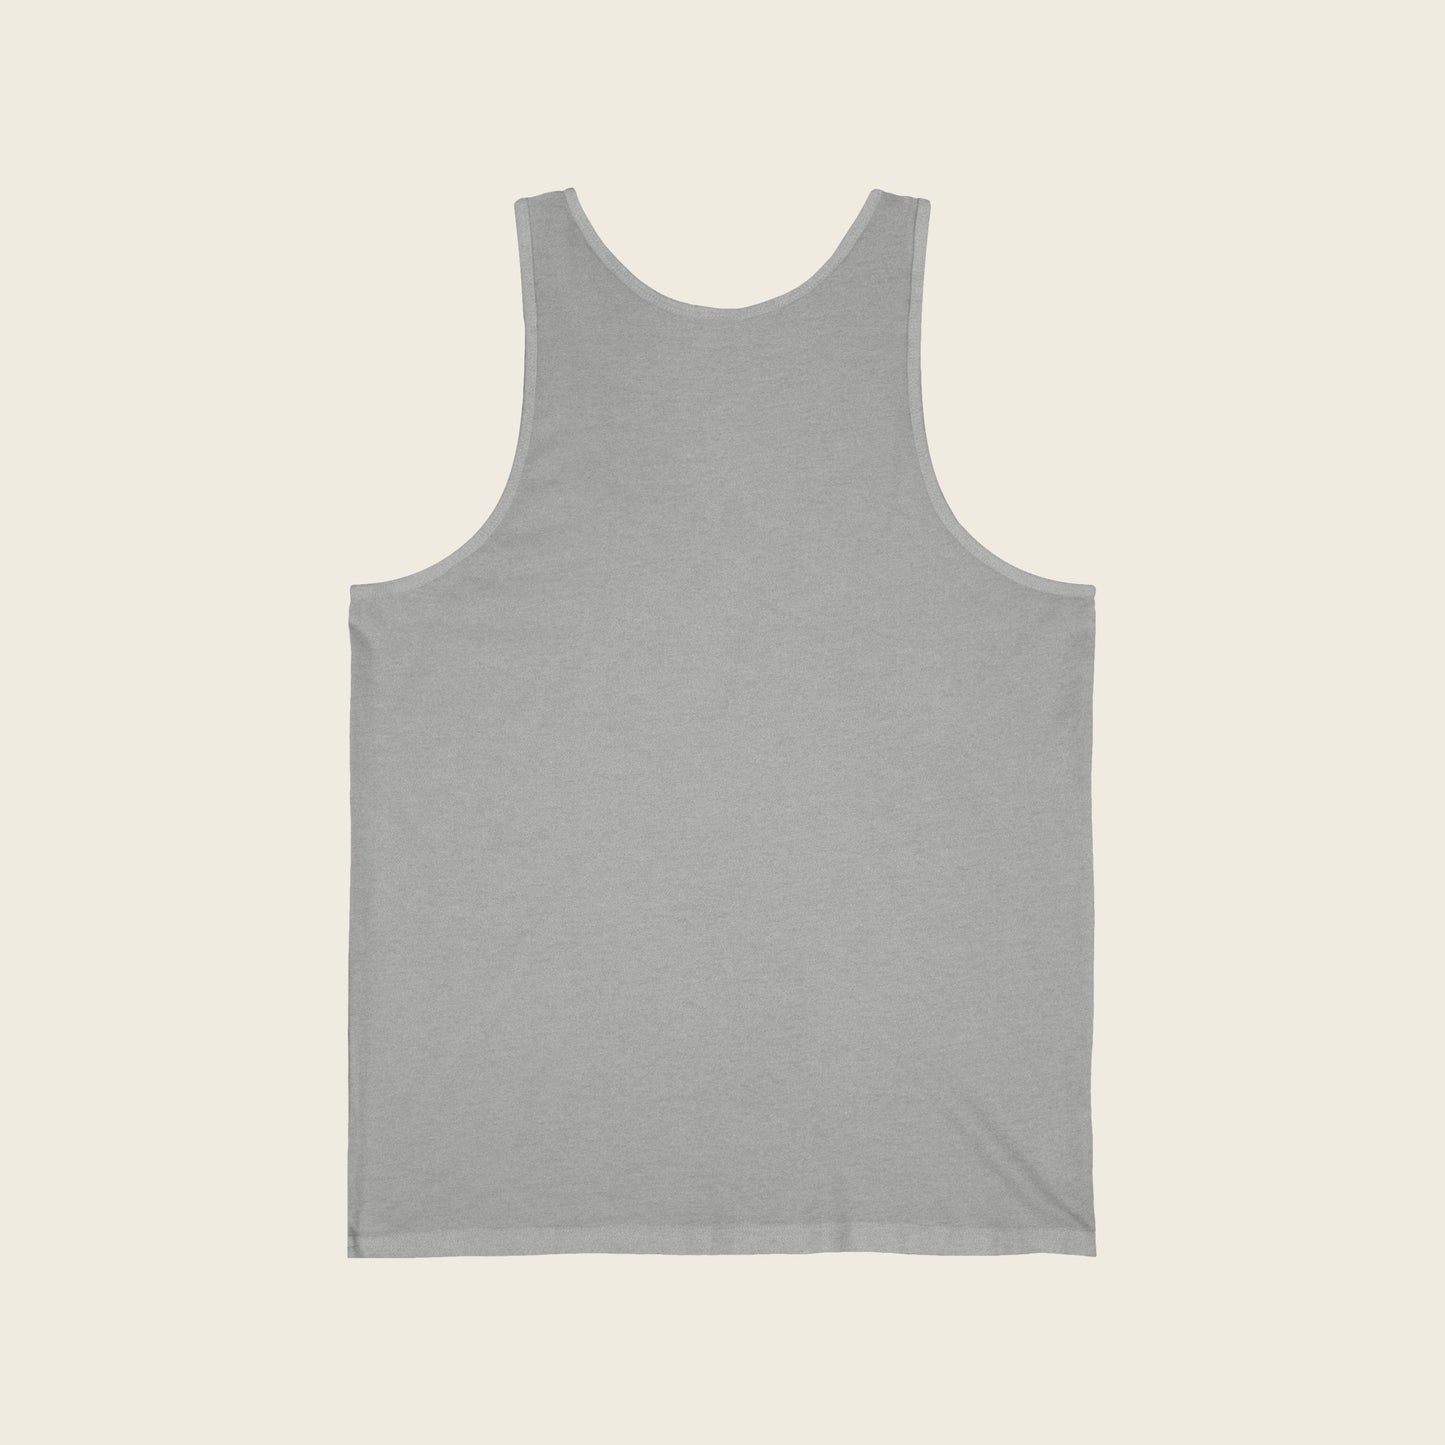 That's Clutch Jersey Tank | Clutchcloth Automotive Apparel